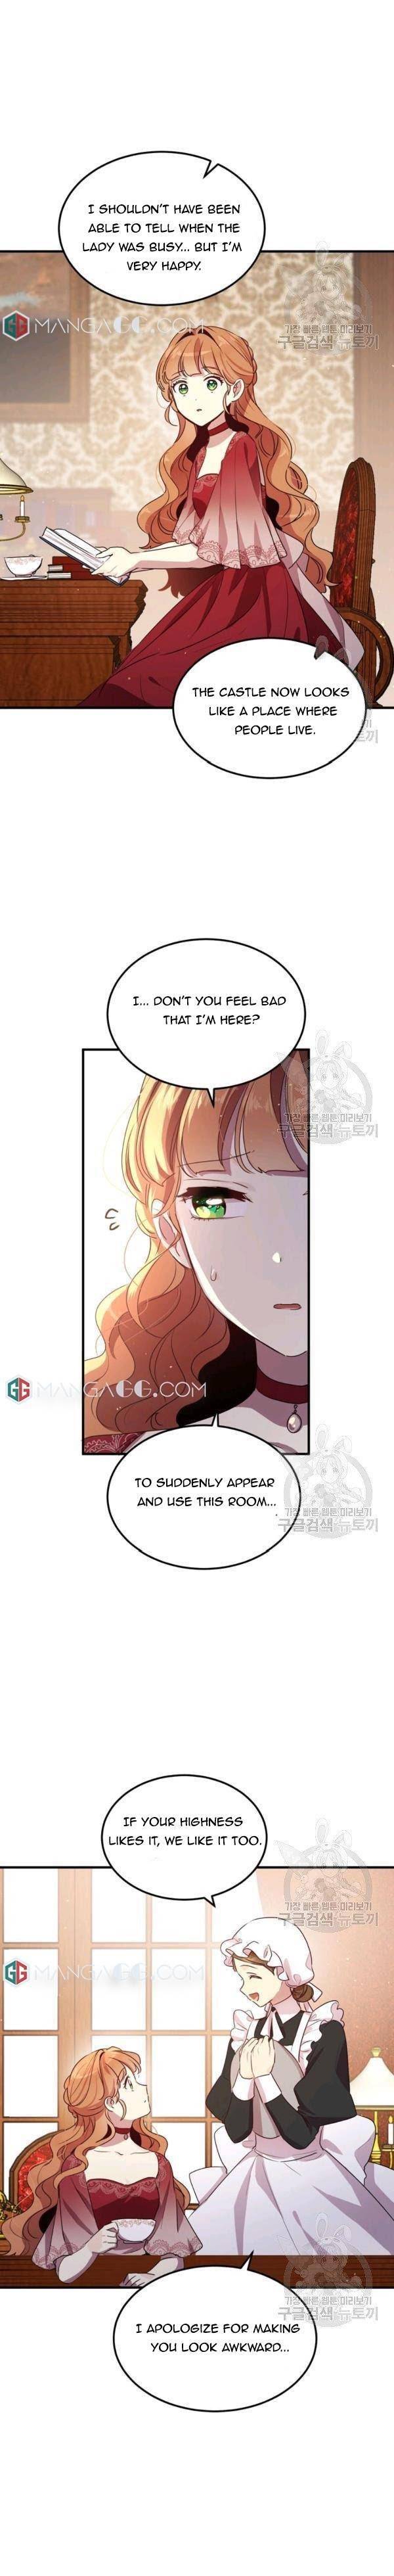 Why Are You Doing This, My Duke!? Webtoon - chapter 102 - #4